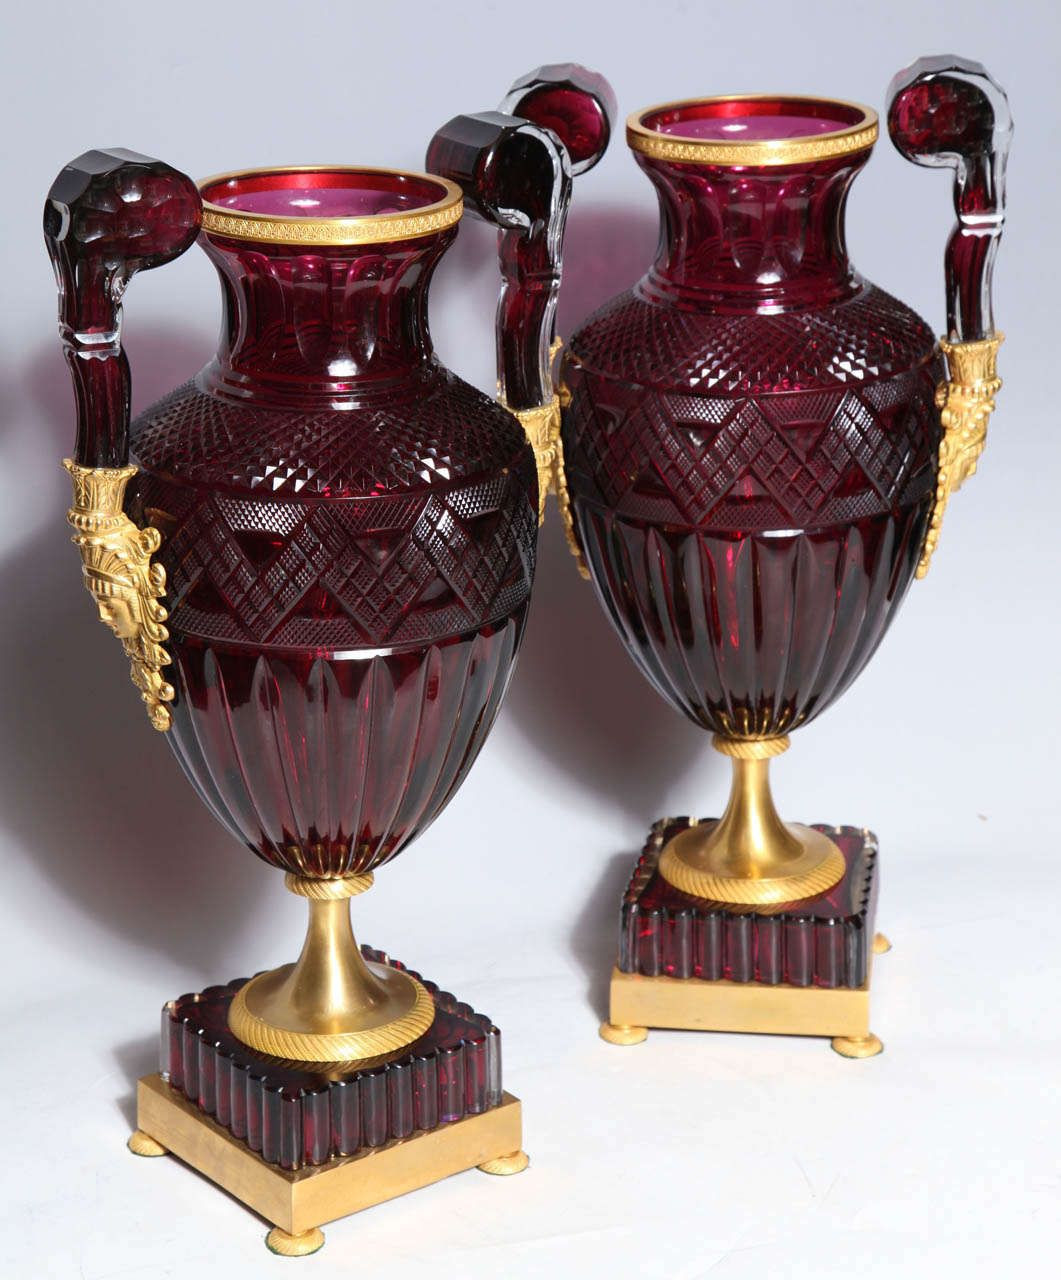 15 Fashionable Amethyst Glass Vase 2024 free download amethyst glass vase of a magnificent pair of russian imperial ruby glass vases with gilded for a magnificent pair of russian imperial ruby glass vases with gilded bronze mounts image 2